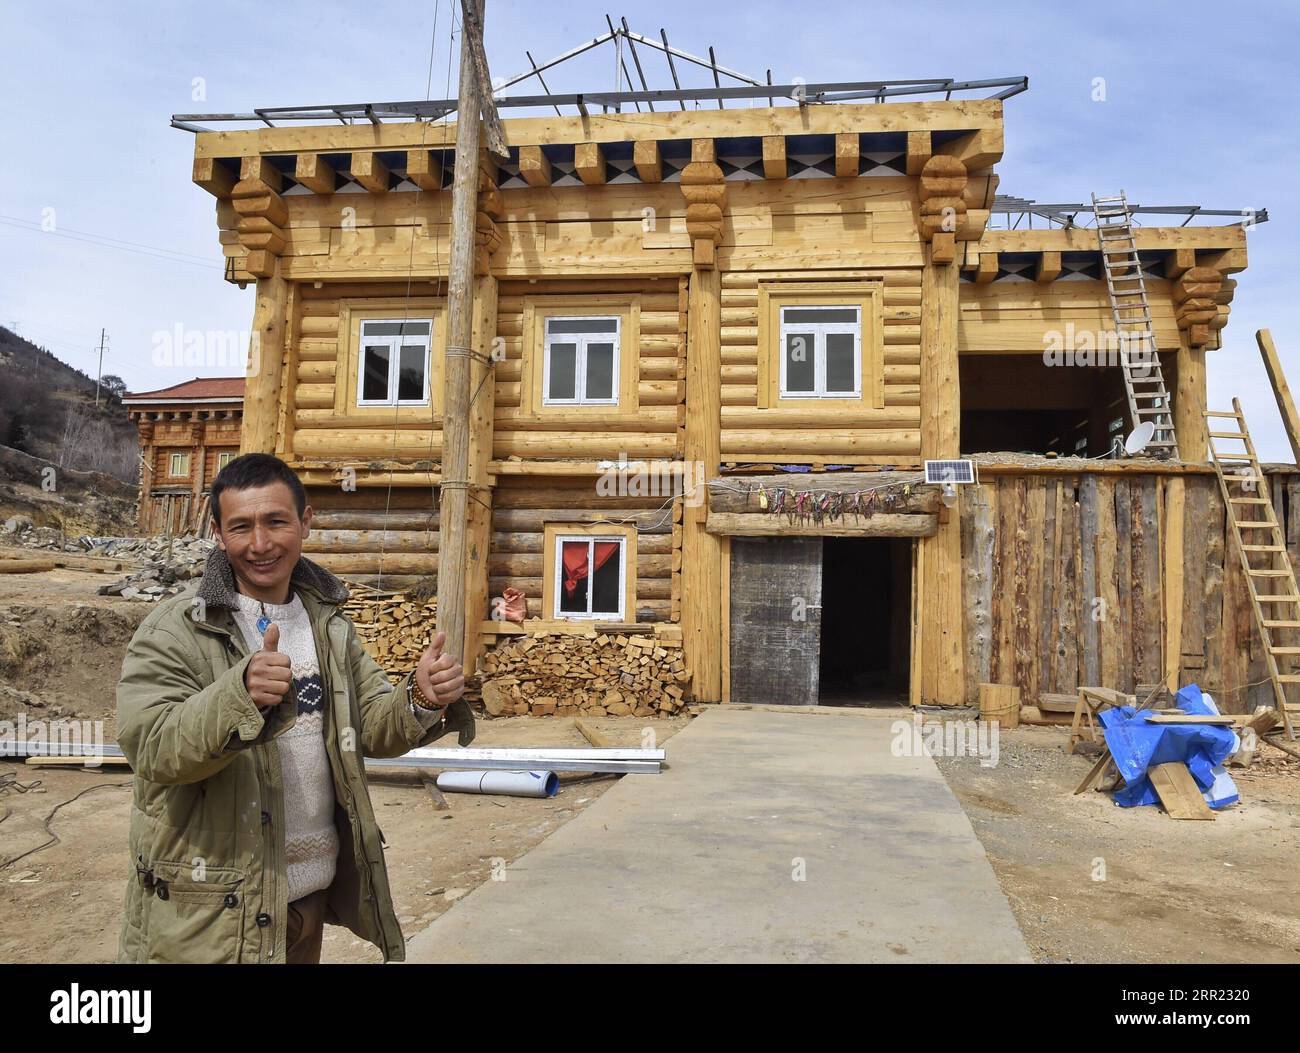 200930 -- CHENGDU, Sept. 30, 2020 -- A once poverty-stricken villager poses for a photo with his new house under construction in Geka Village of Mazi Town, Dawu County of Tibetan Autonomous Prefecture of Garze, southwest China s Sichuan Province, March 11, 2017.  Xinhua Headlines: 70 years on, China s Garze Tibetan prefecture sings empowerment anthem of development LiuxKun PUBLICATIONxNOTxINxCHN Stock Photo